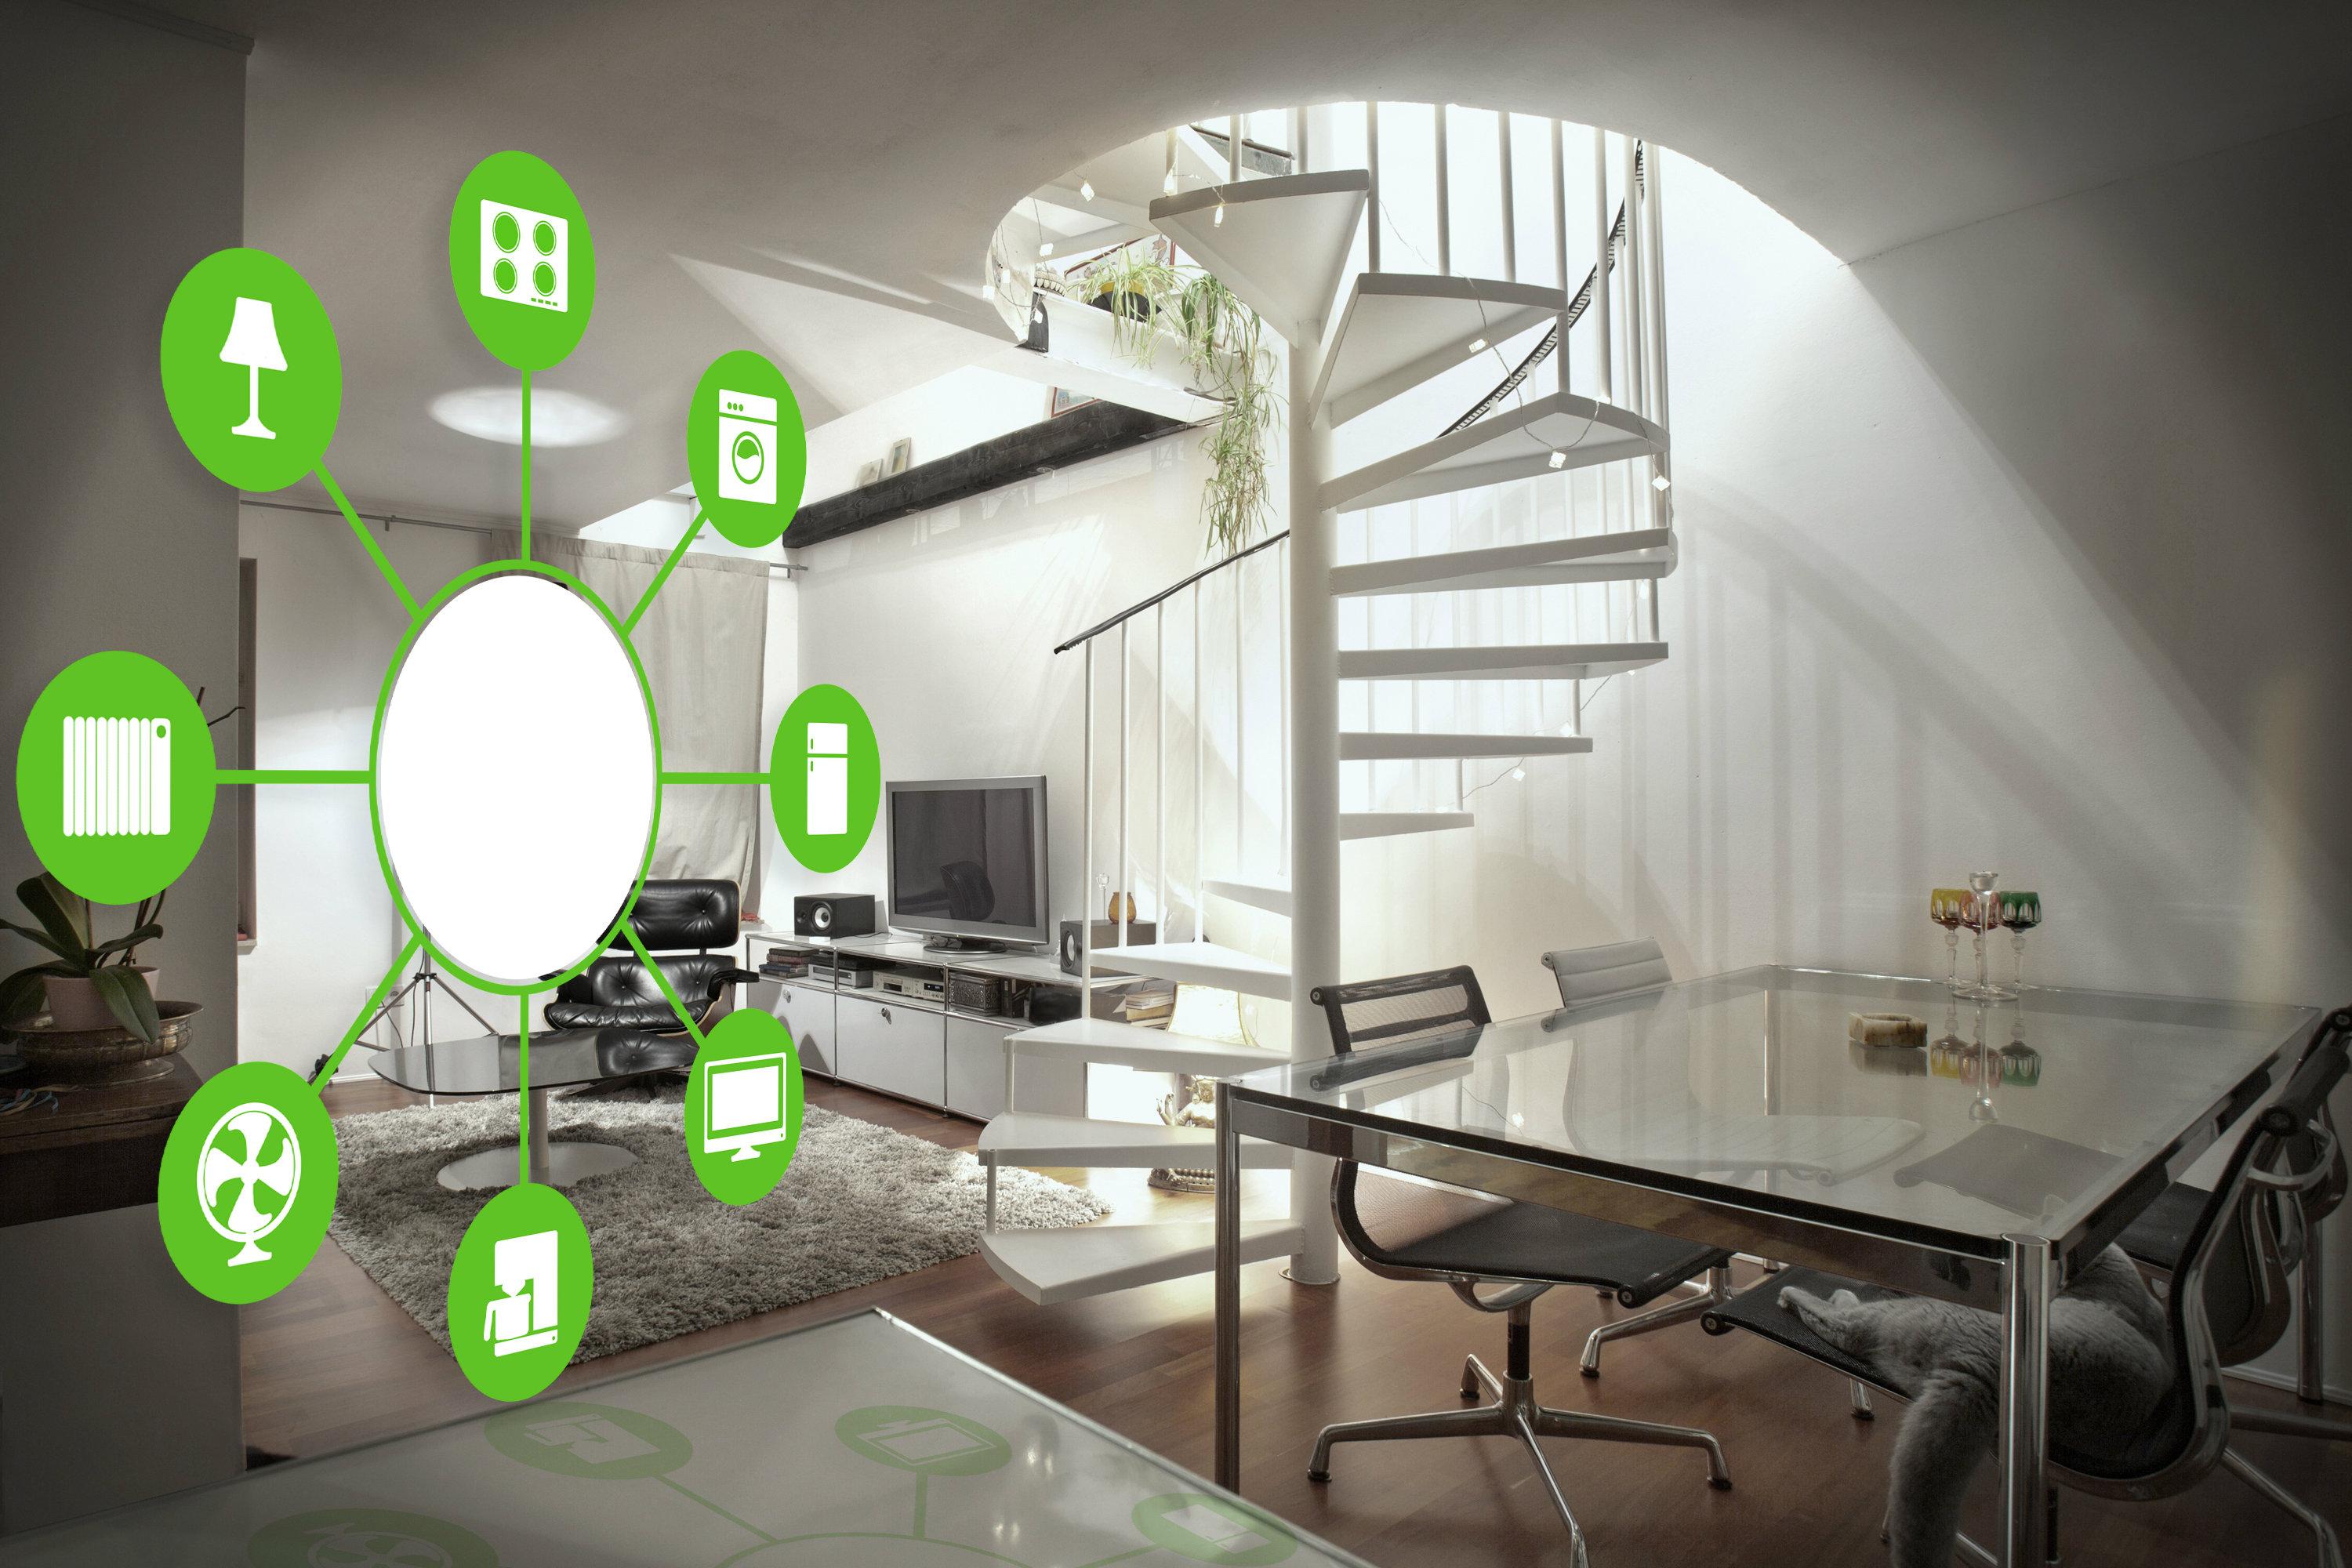 Embracing Technology: Smart Home Devices That Complement Your Decor